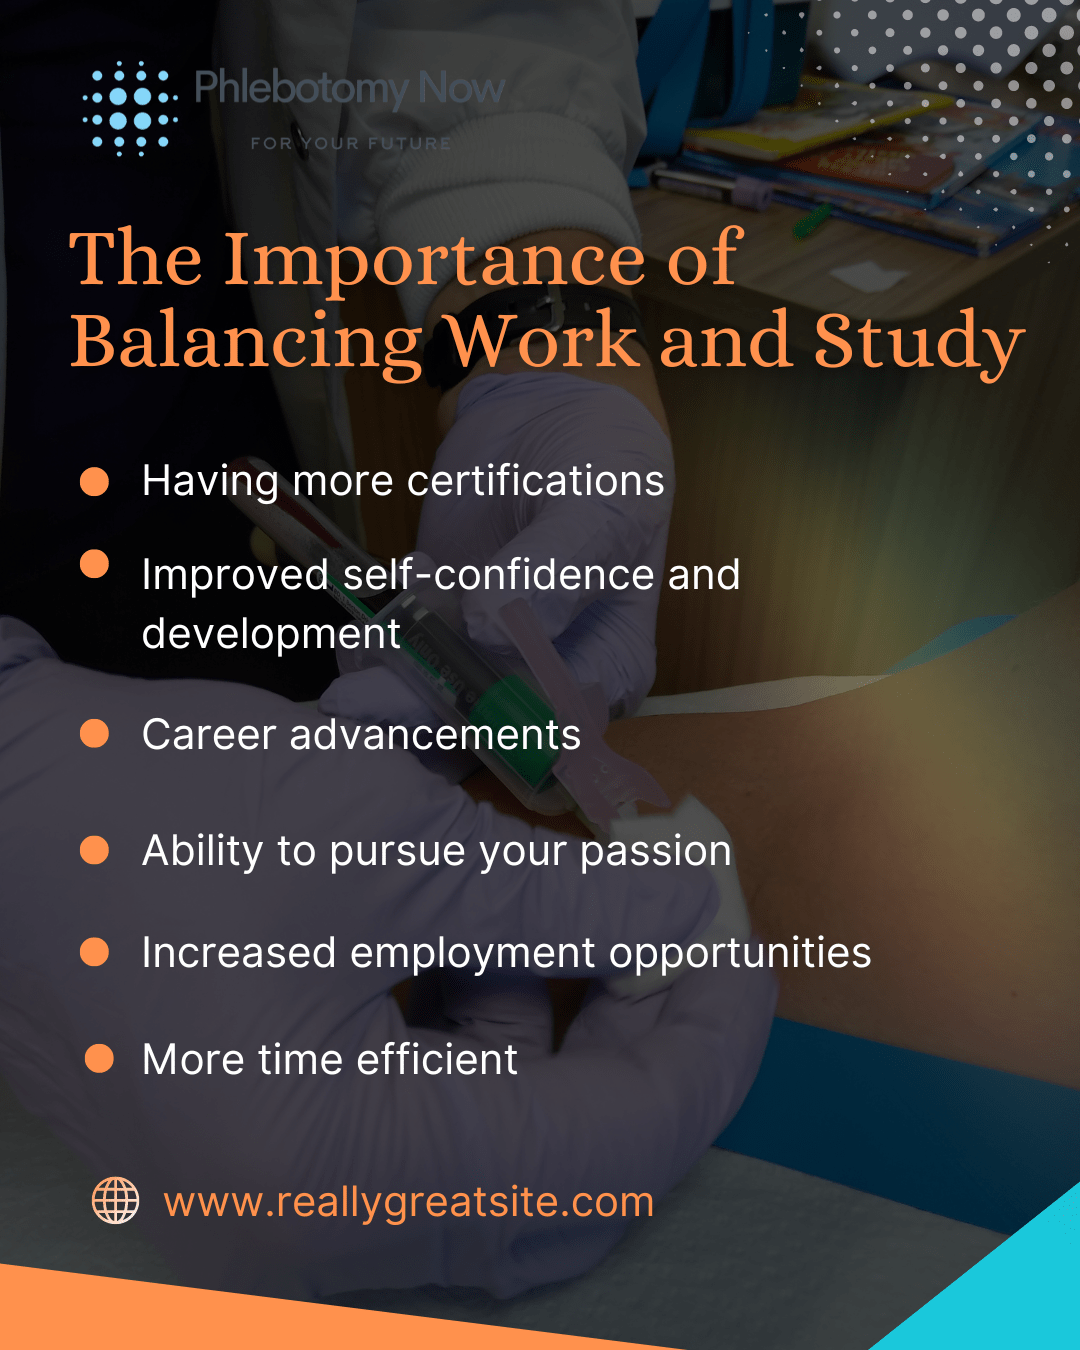 The Importance of Balancing Work and Study